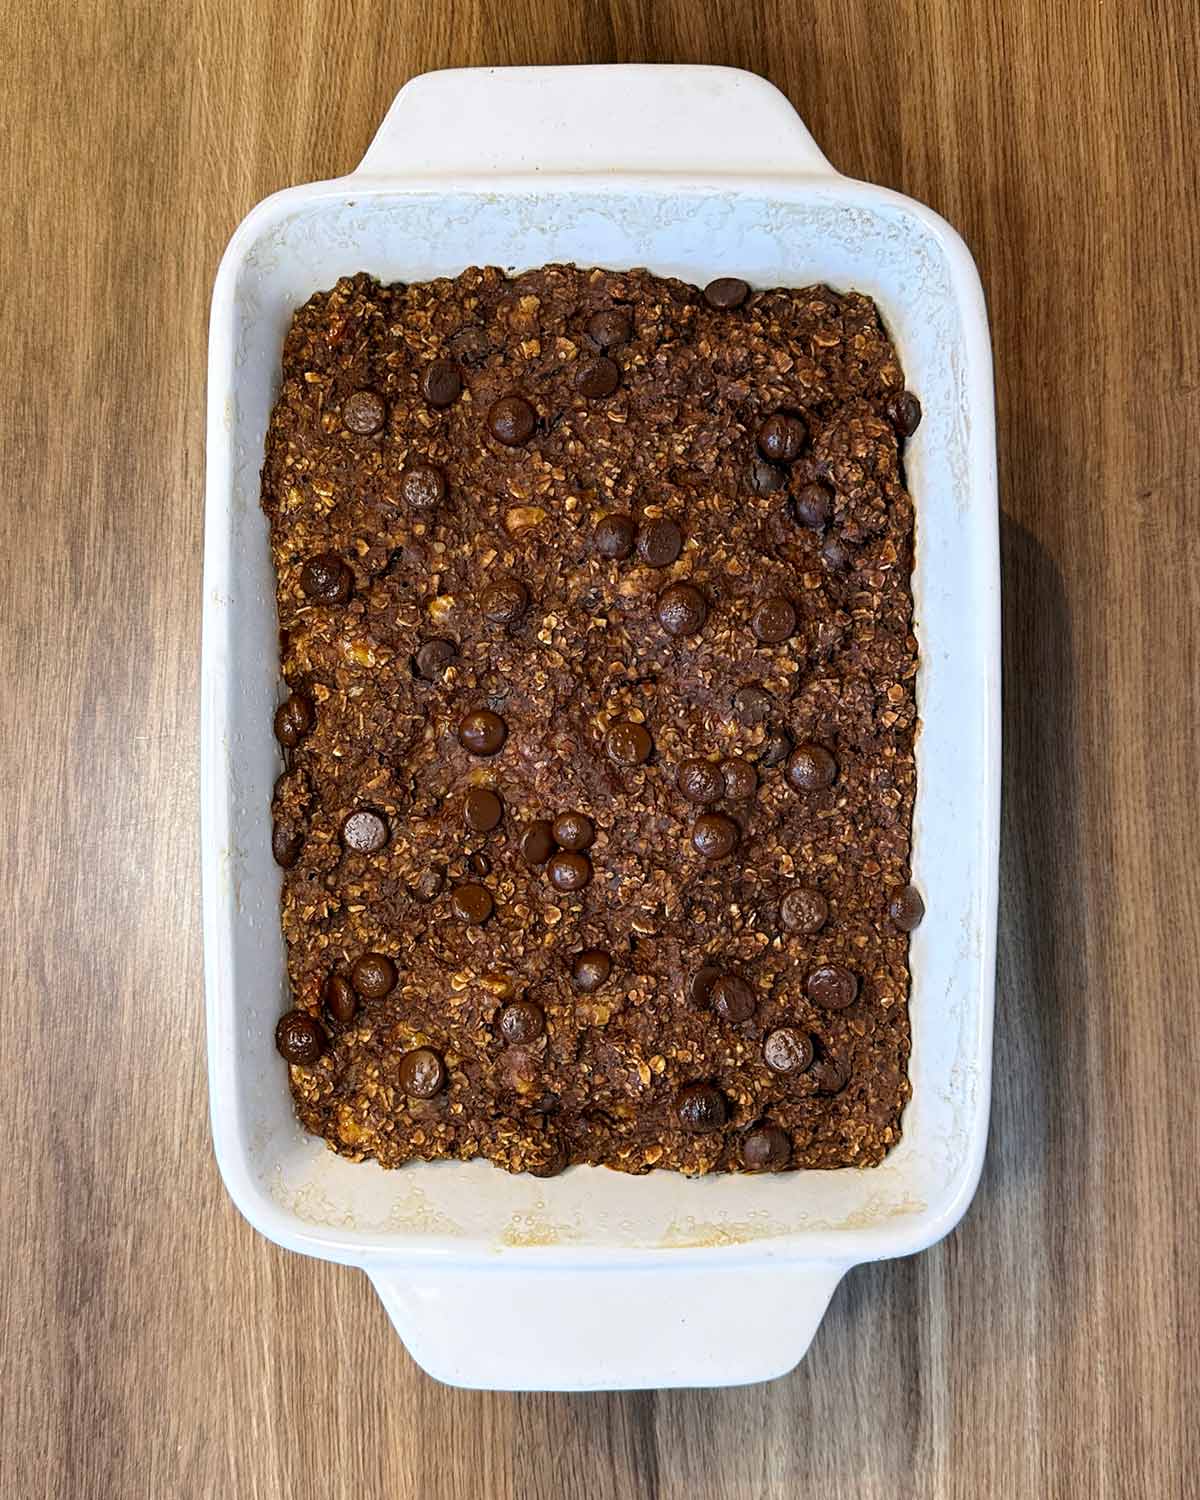 Cooked brownie oatmeal in the baking dish.